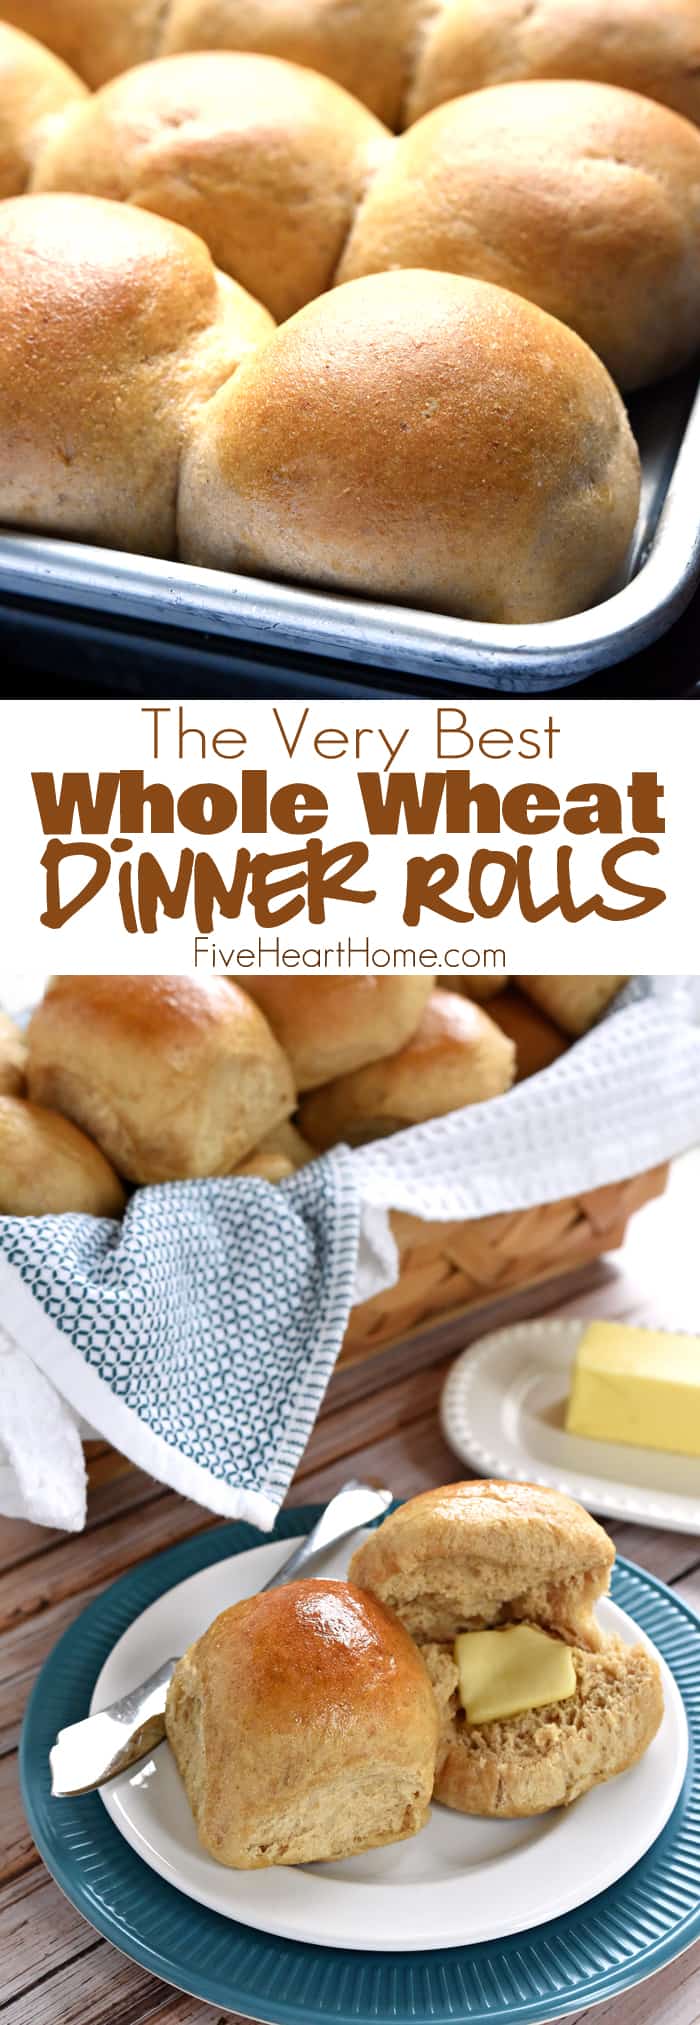 Homemade Whole Wheat Dinner Rolls ~ adapted from our incredibly popular Homemade Whole Wheat Bread recipe, these 100% whole wheat dinner rolls are soft, pillowy, moist, easy to make, and truly the BEST! | FiveHeartHome.com via @fivehearthome